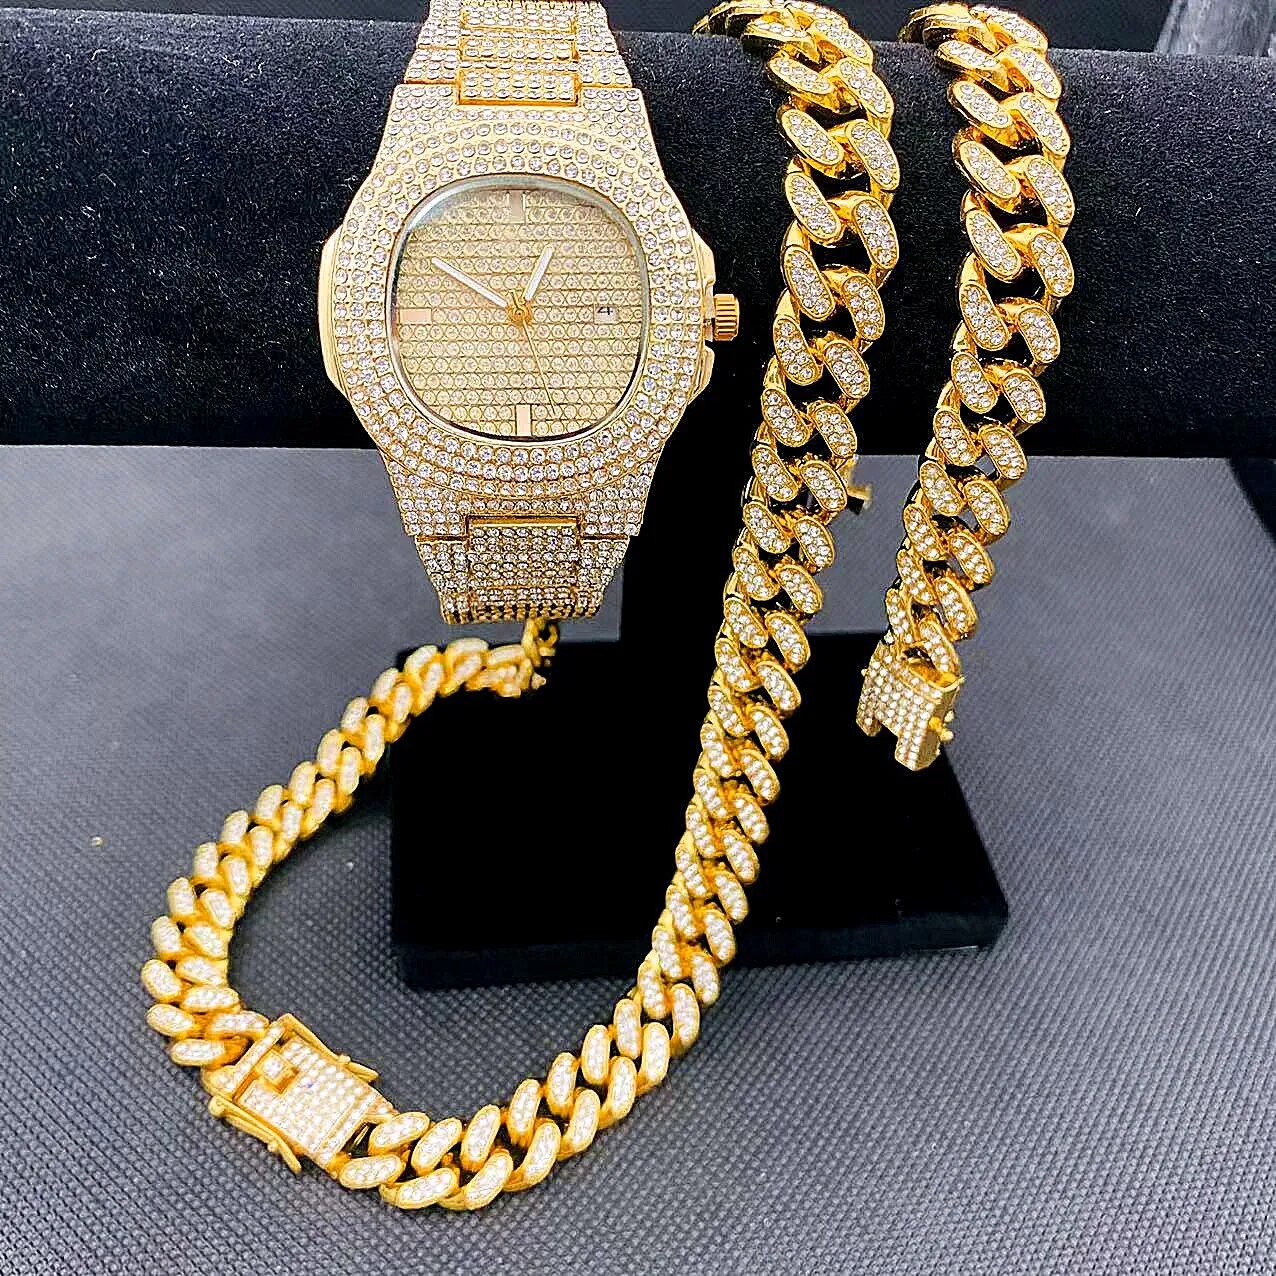 Luxury Iced Out Watch Necklaces Bracelet Mens Hip Hop Jewelry Set Miama Cuban Link Chain Choker Jewelry Blinged Out Gold Watches